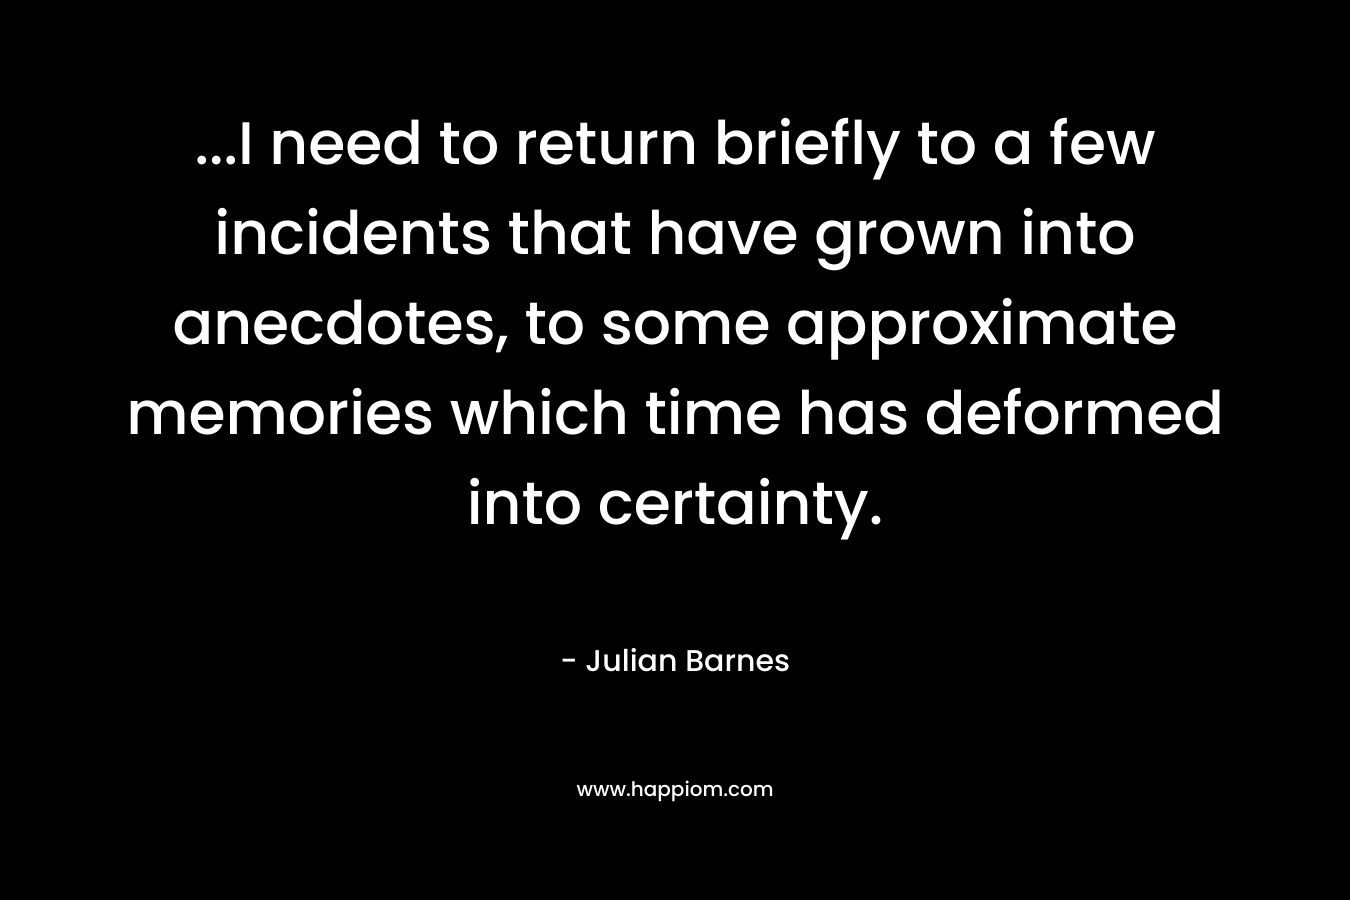 …I need to return briefly to a few incidents that have grown into anecdotes, to some approximate memories which time has deformed into certainty. – Julian Barnes